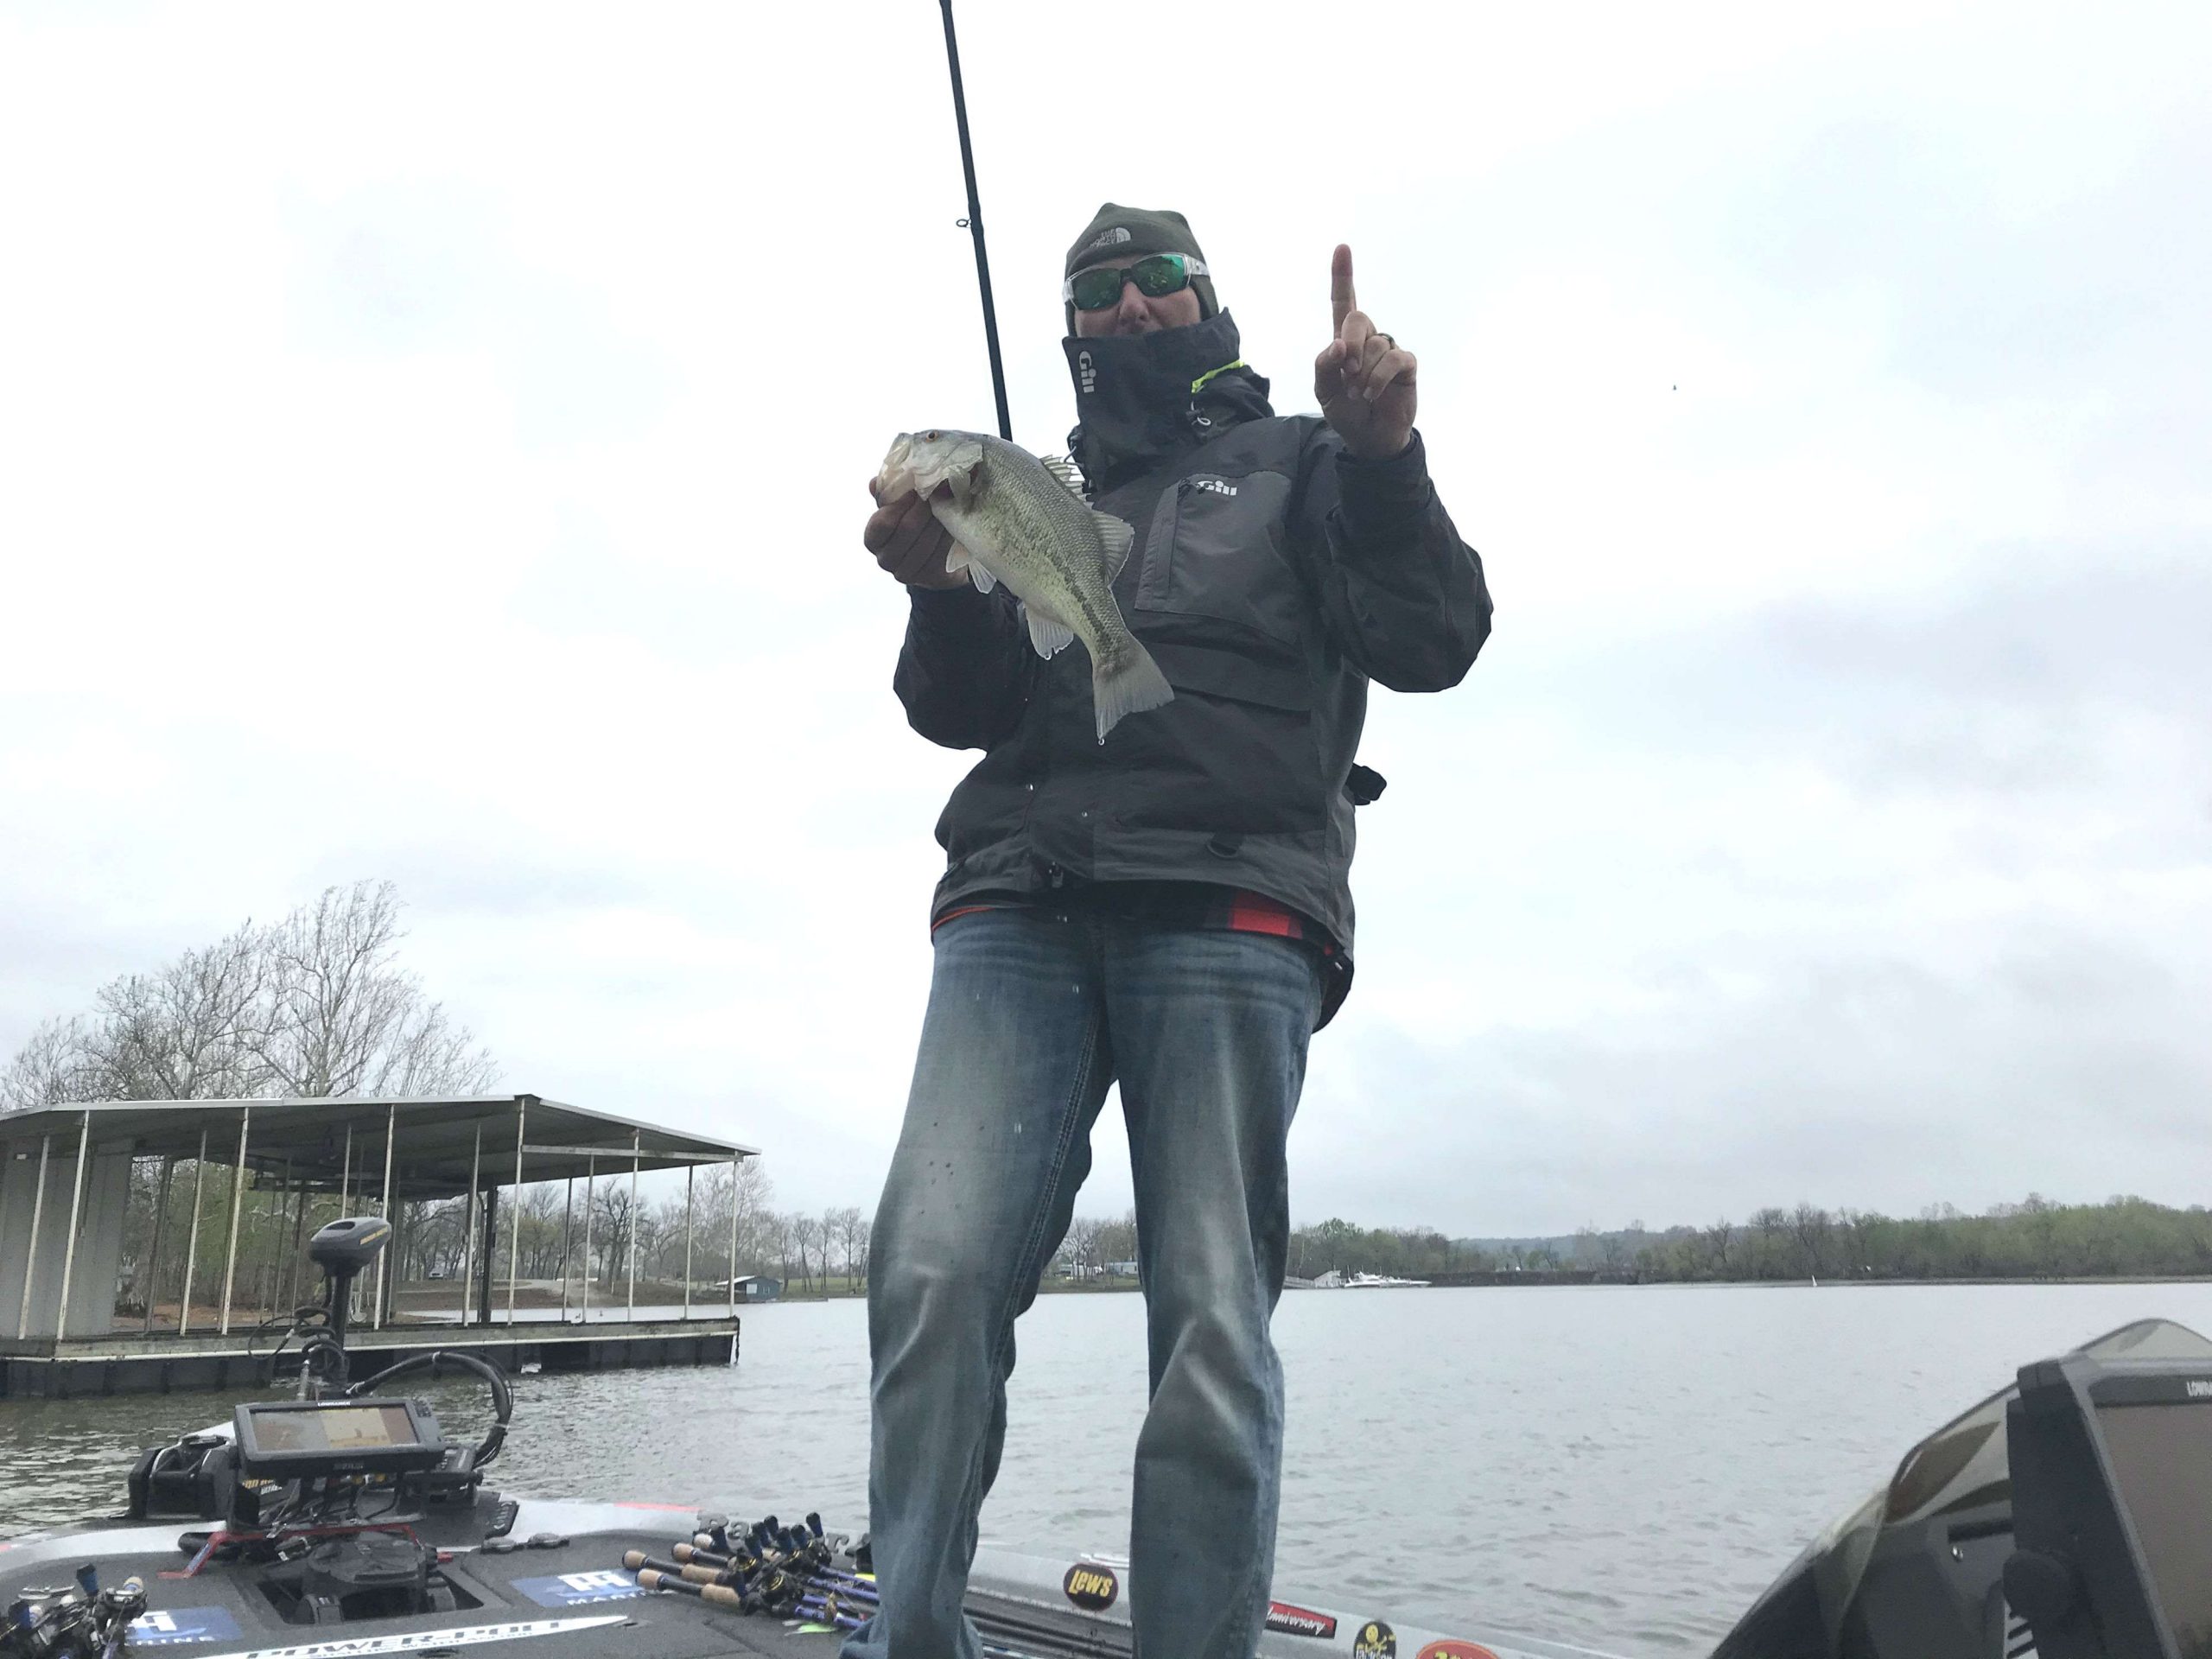 Wesley Strader lands fish No. 1 while rocking to some Shinedown on the stereo. 










